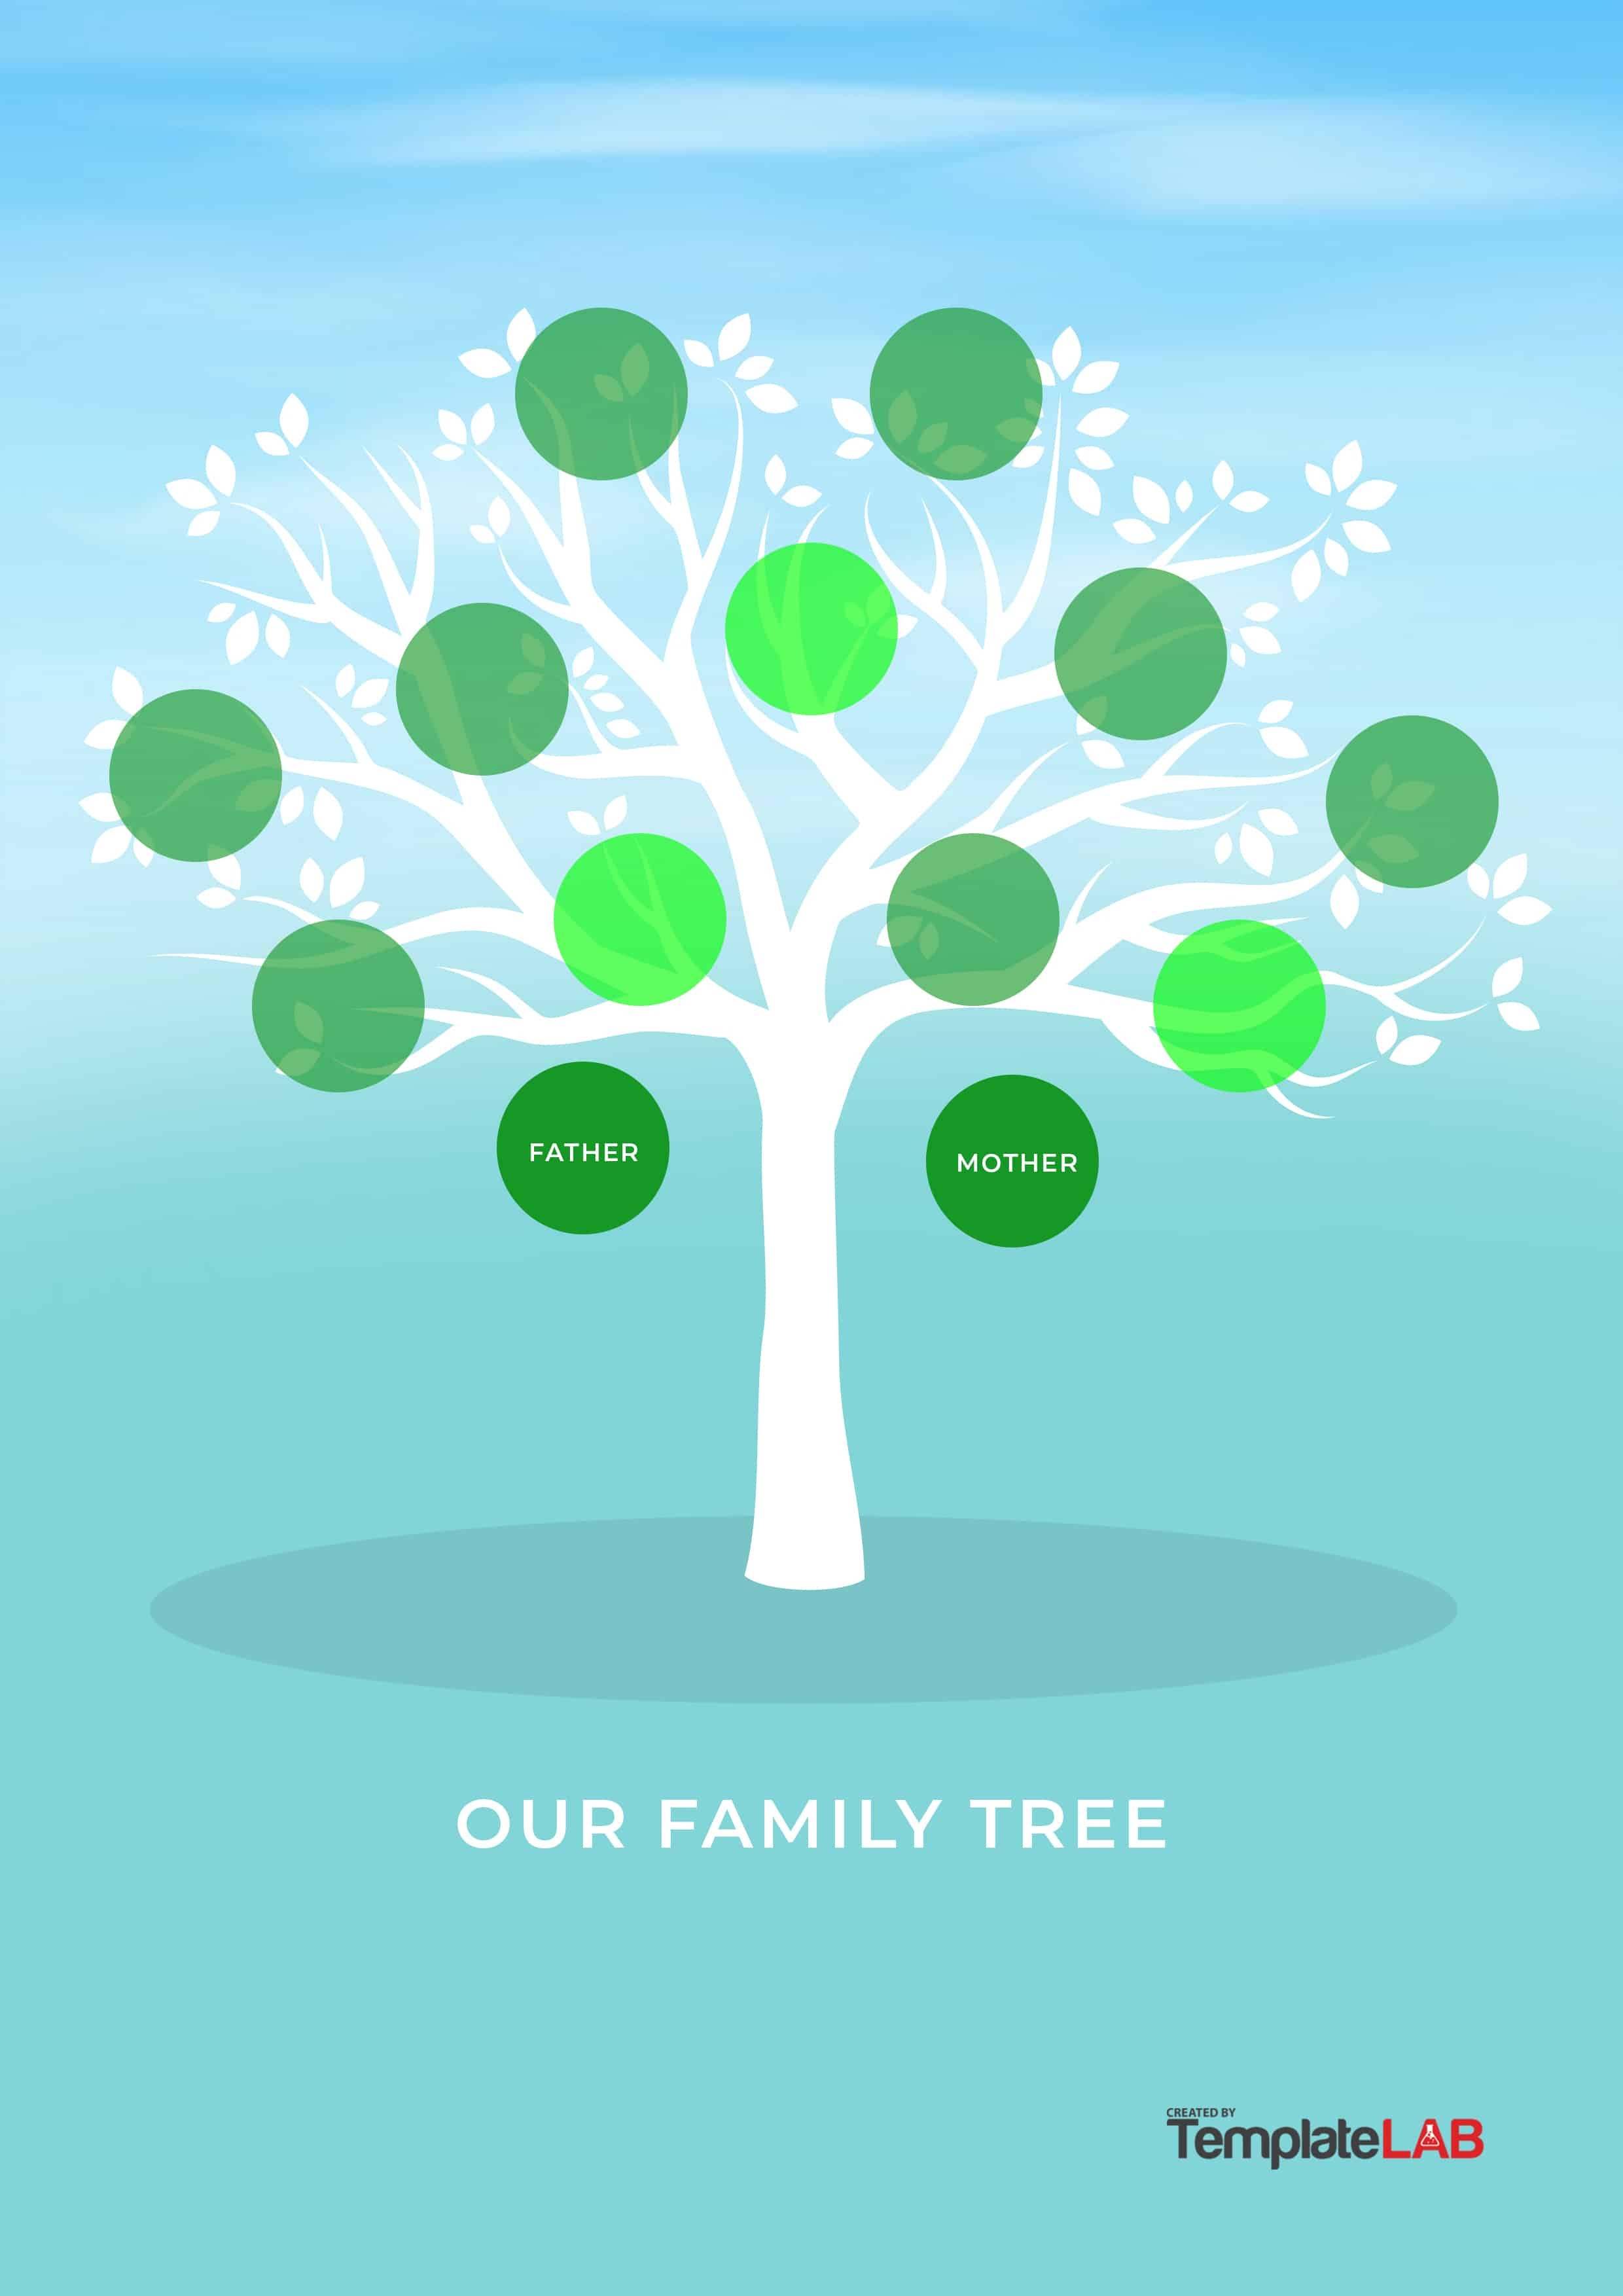 50+ Free Family Tree Templates (Word, Excel, Pdf) ᐅ Template Lab - Free Printable Family Tree Template 4 Generations